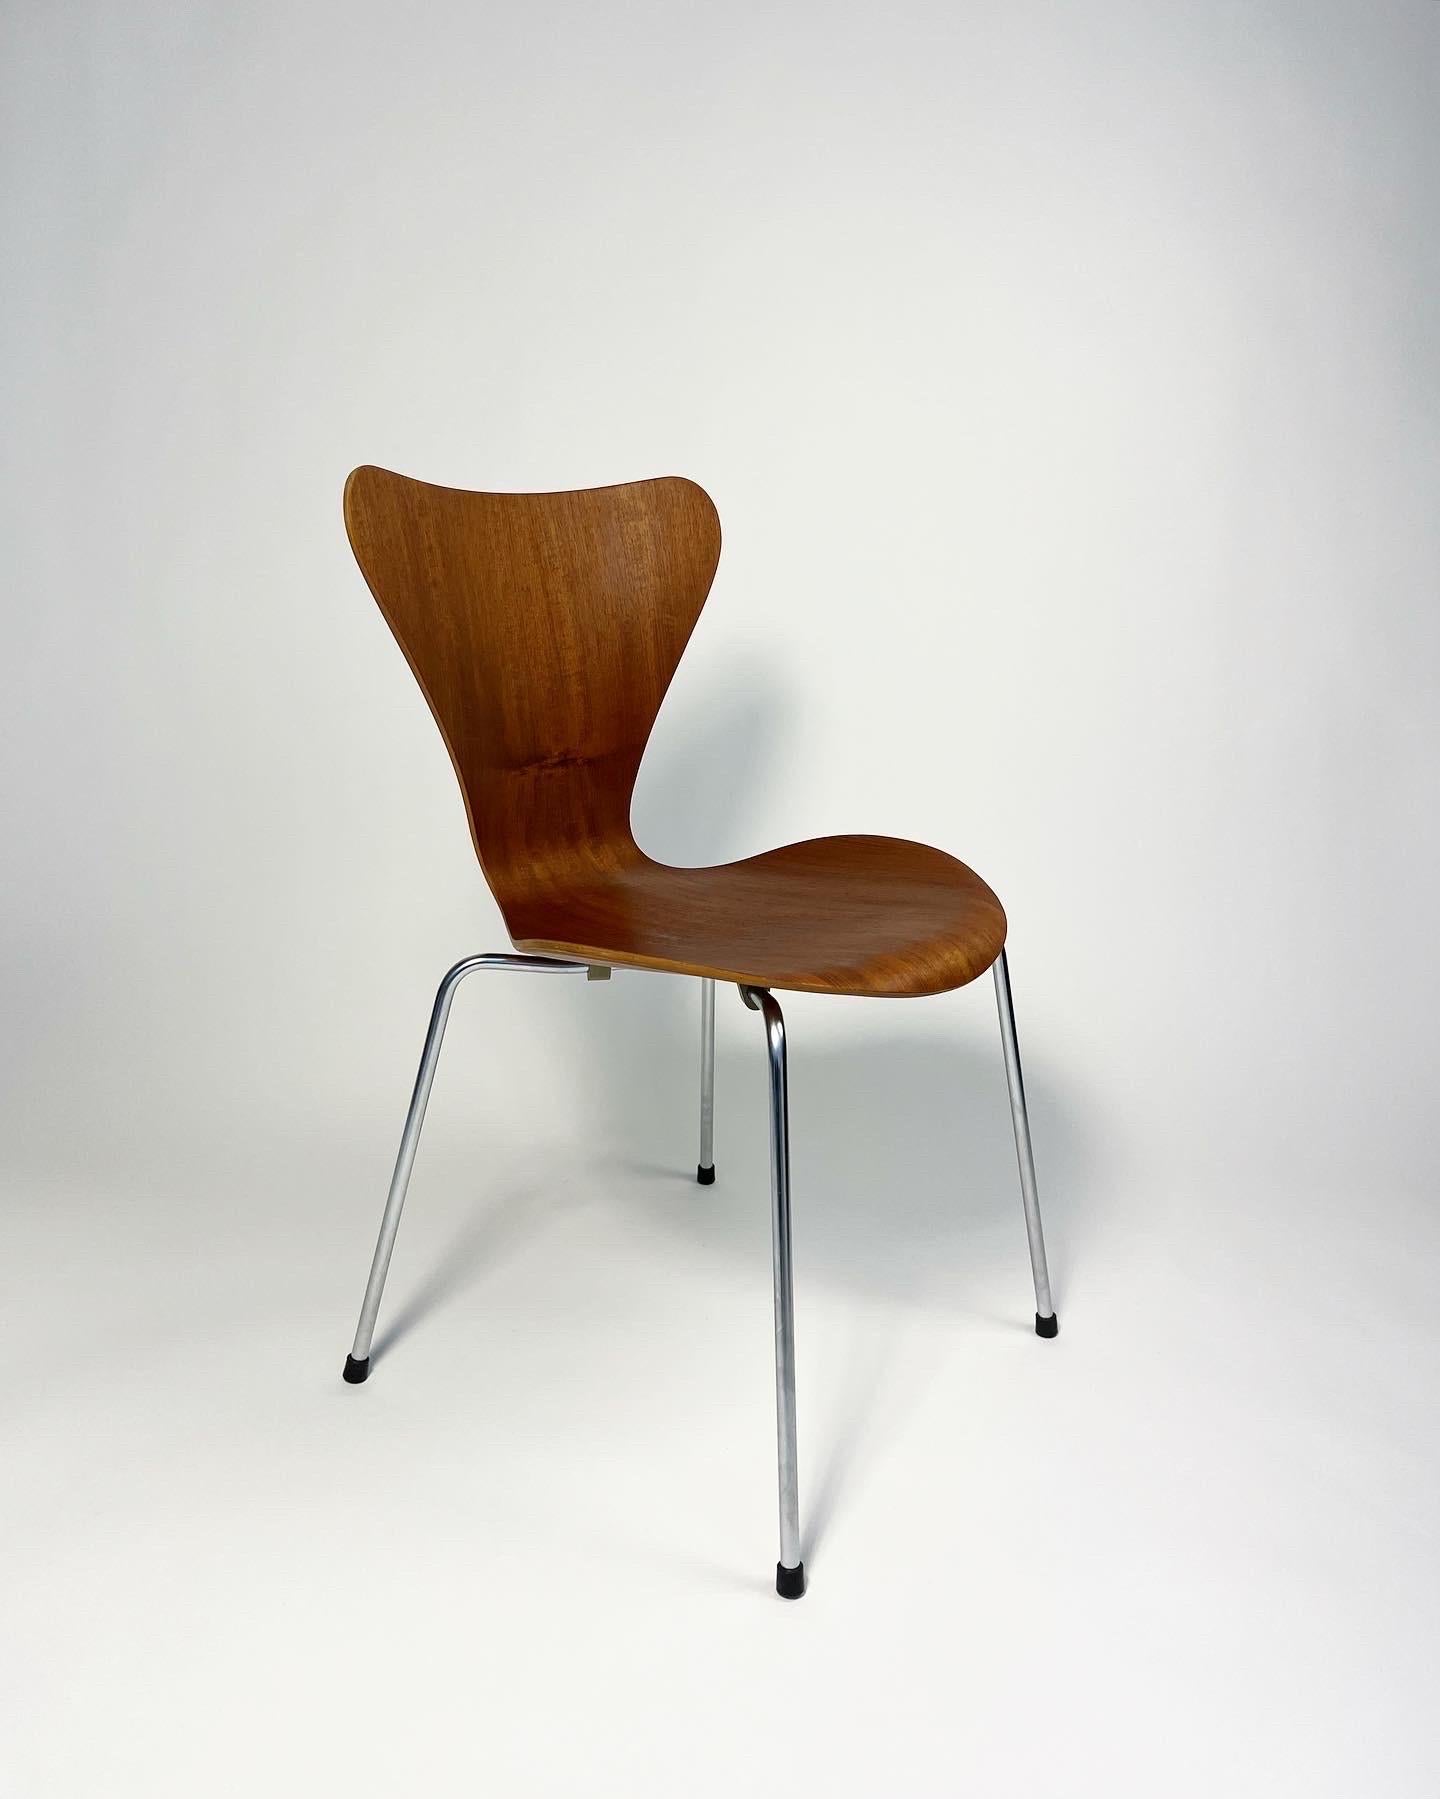 Arne Jacobsen ‚Series 7’ teak chair, model No. 3107 for Fritz Hansen, produced in 1966.

Made of moulded teak plywood with a steel base and early metal cap.

Good condition, the wood has been deeply cleansed and refinished with oil, newer gliders,